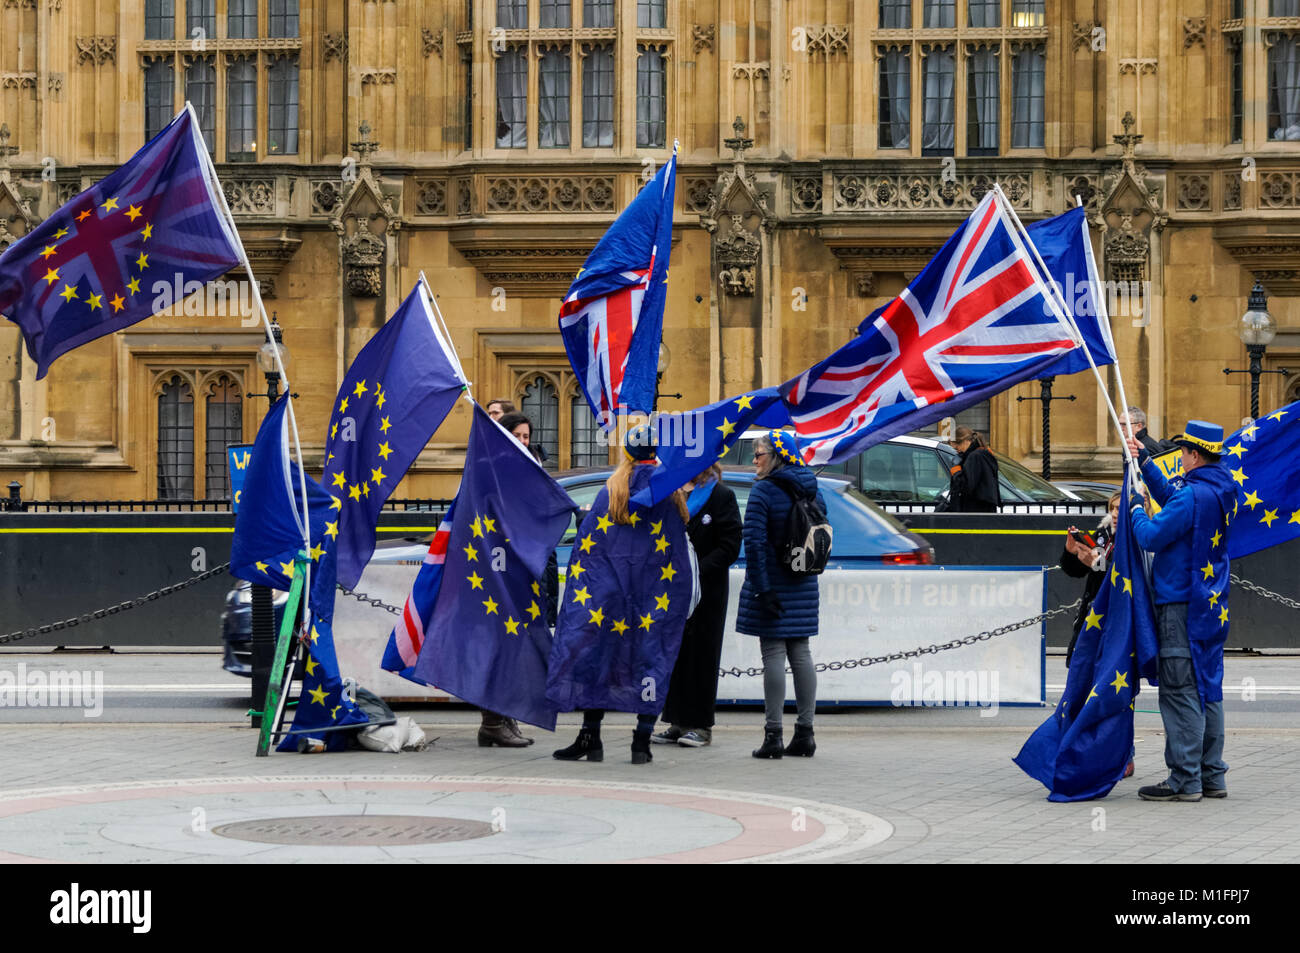 Anti-Brexit protesters demonstrate outside the Houses of Parliament in London, England, United Kingdom, UK Stock Photo